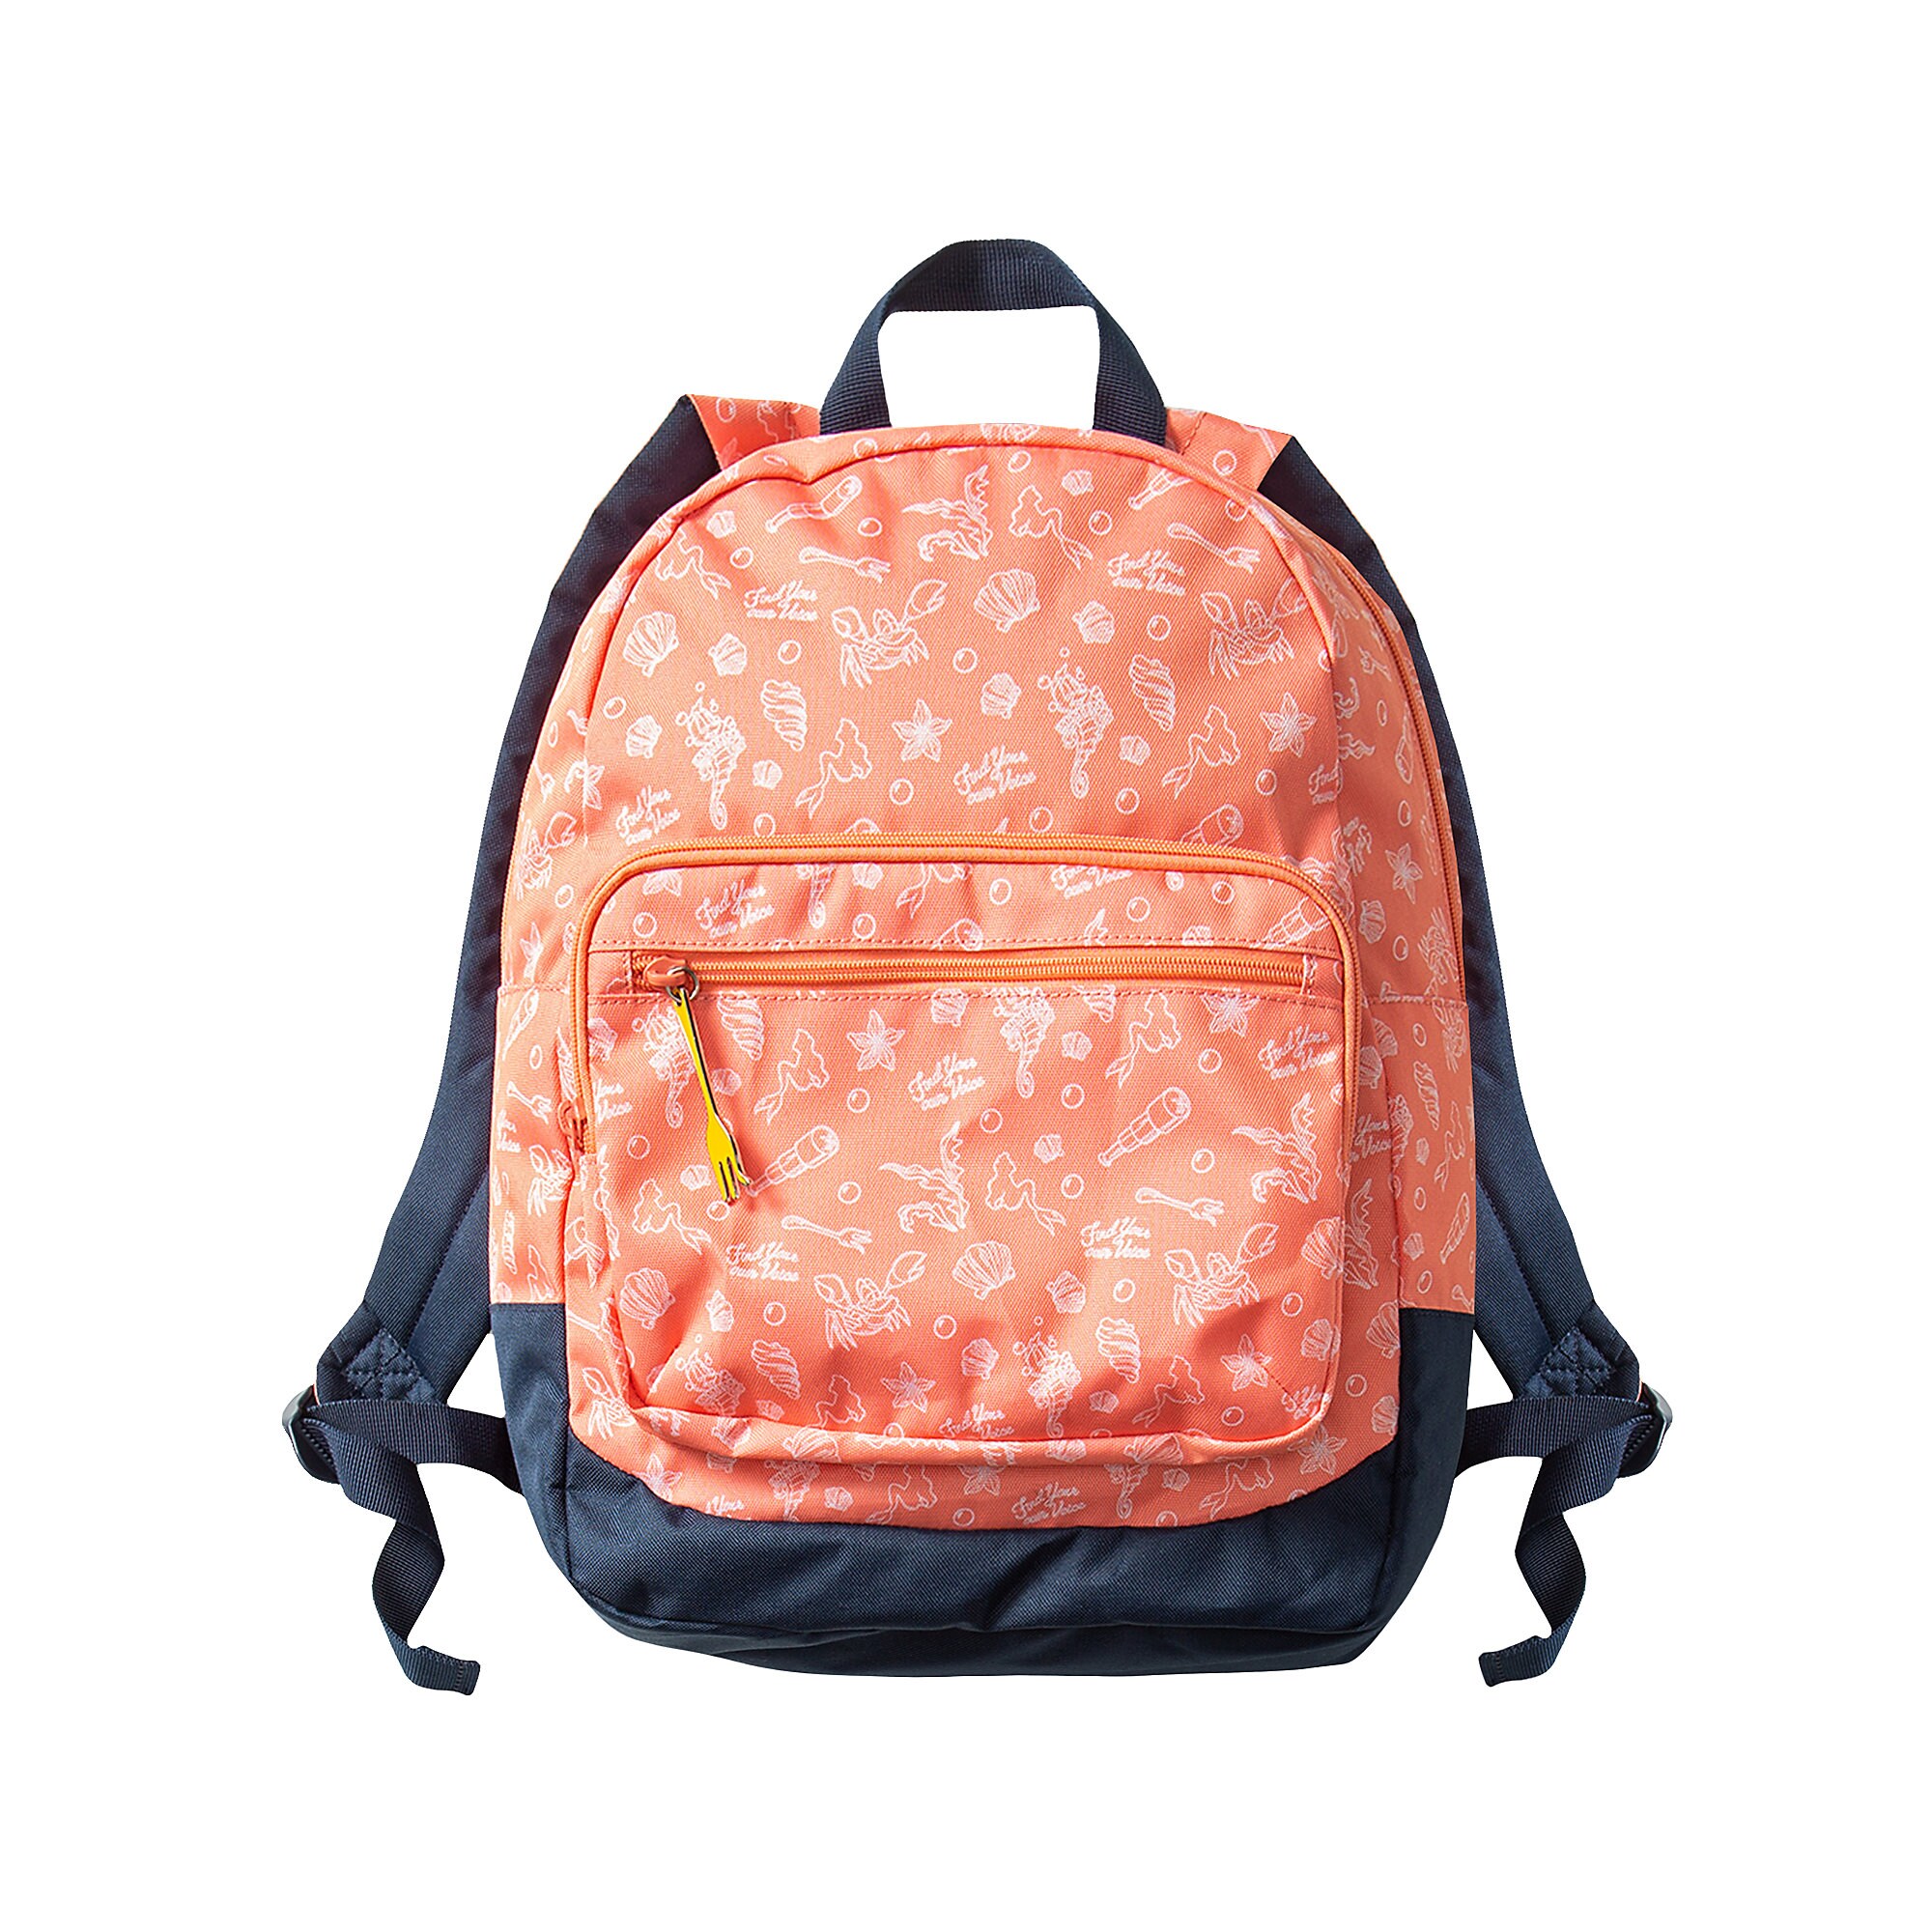 The Little Mermaid Backpack by ROXY Girl - Coral